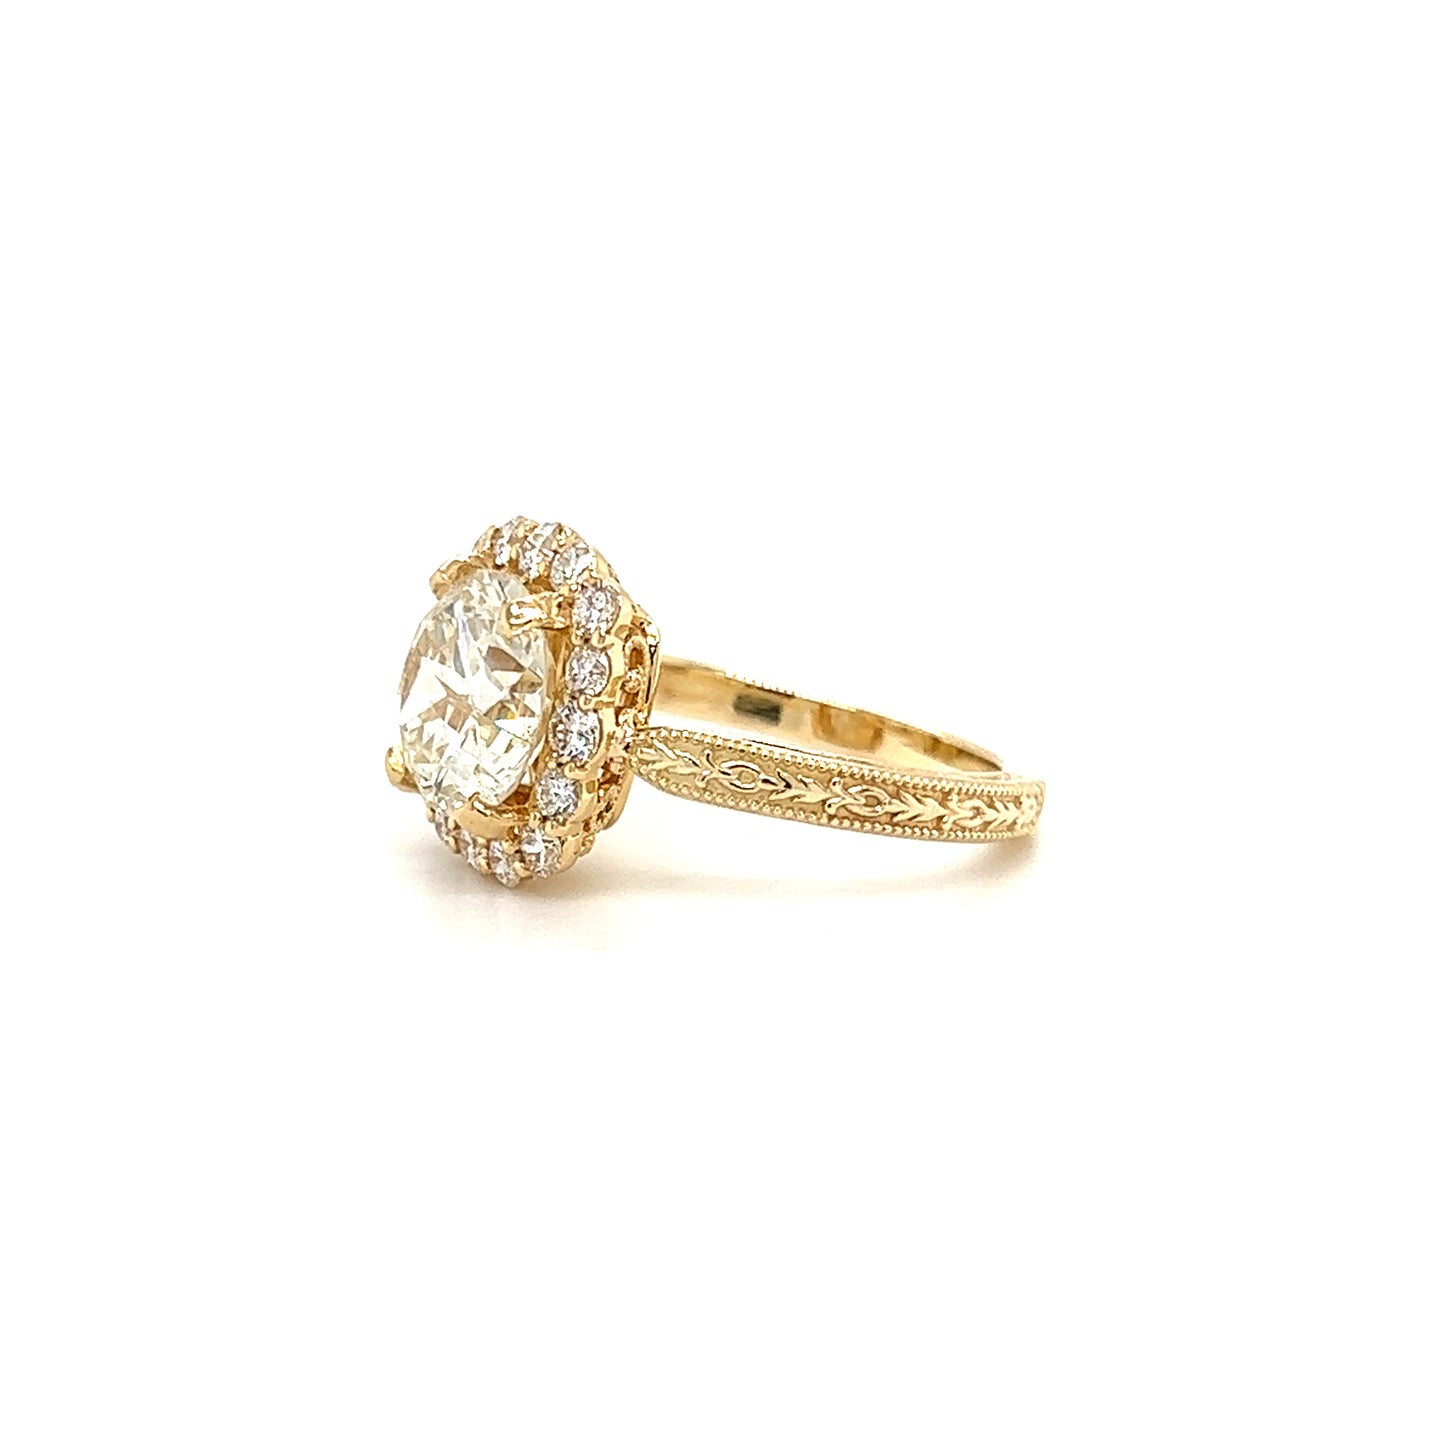 Round Diamond 2.68ct Ring with Diamond Halo in 18K and 14K Yellow Gold Right Side View